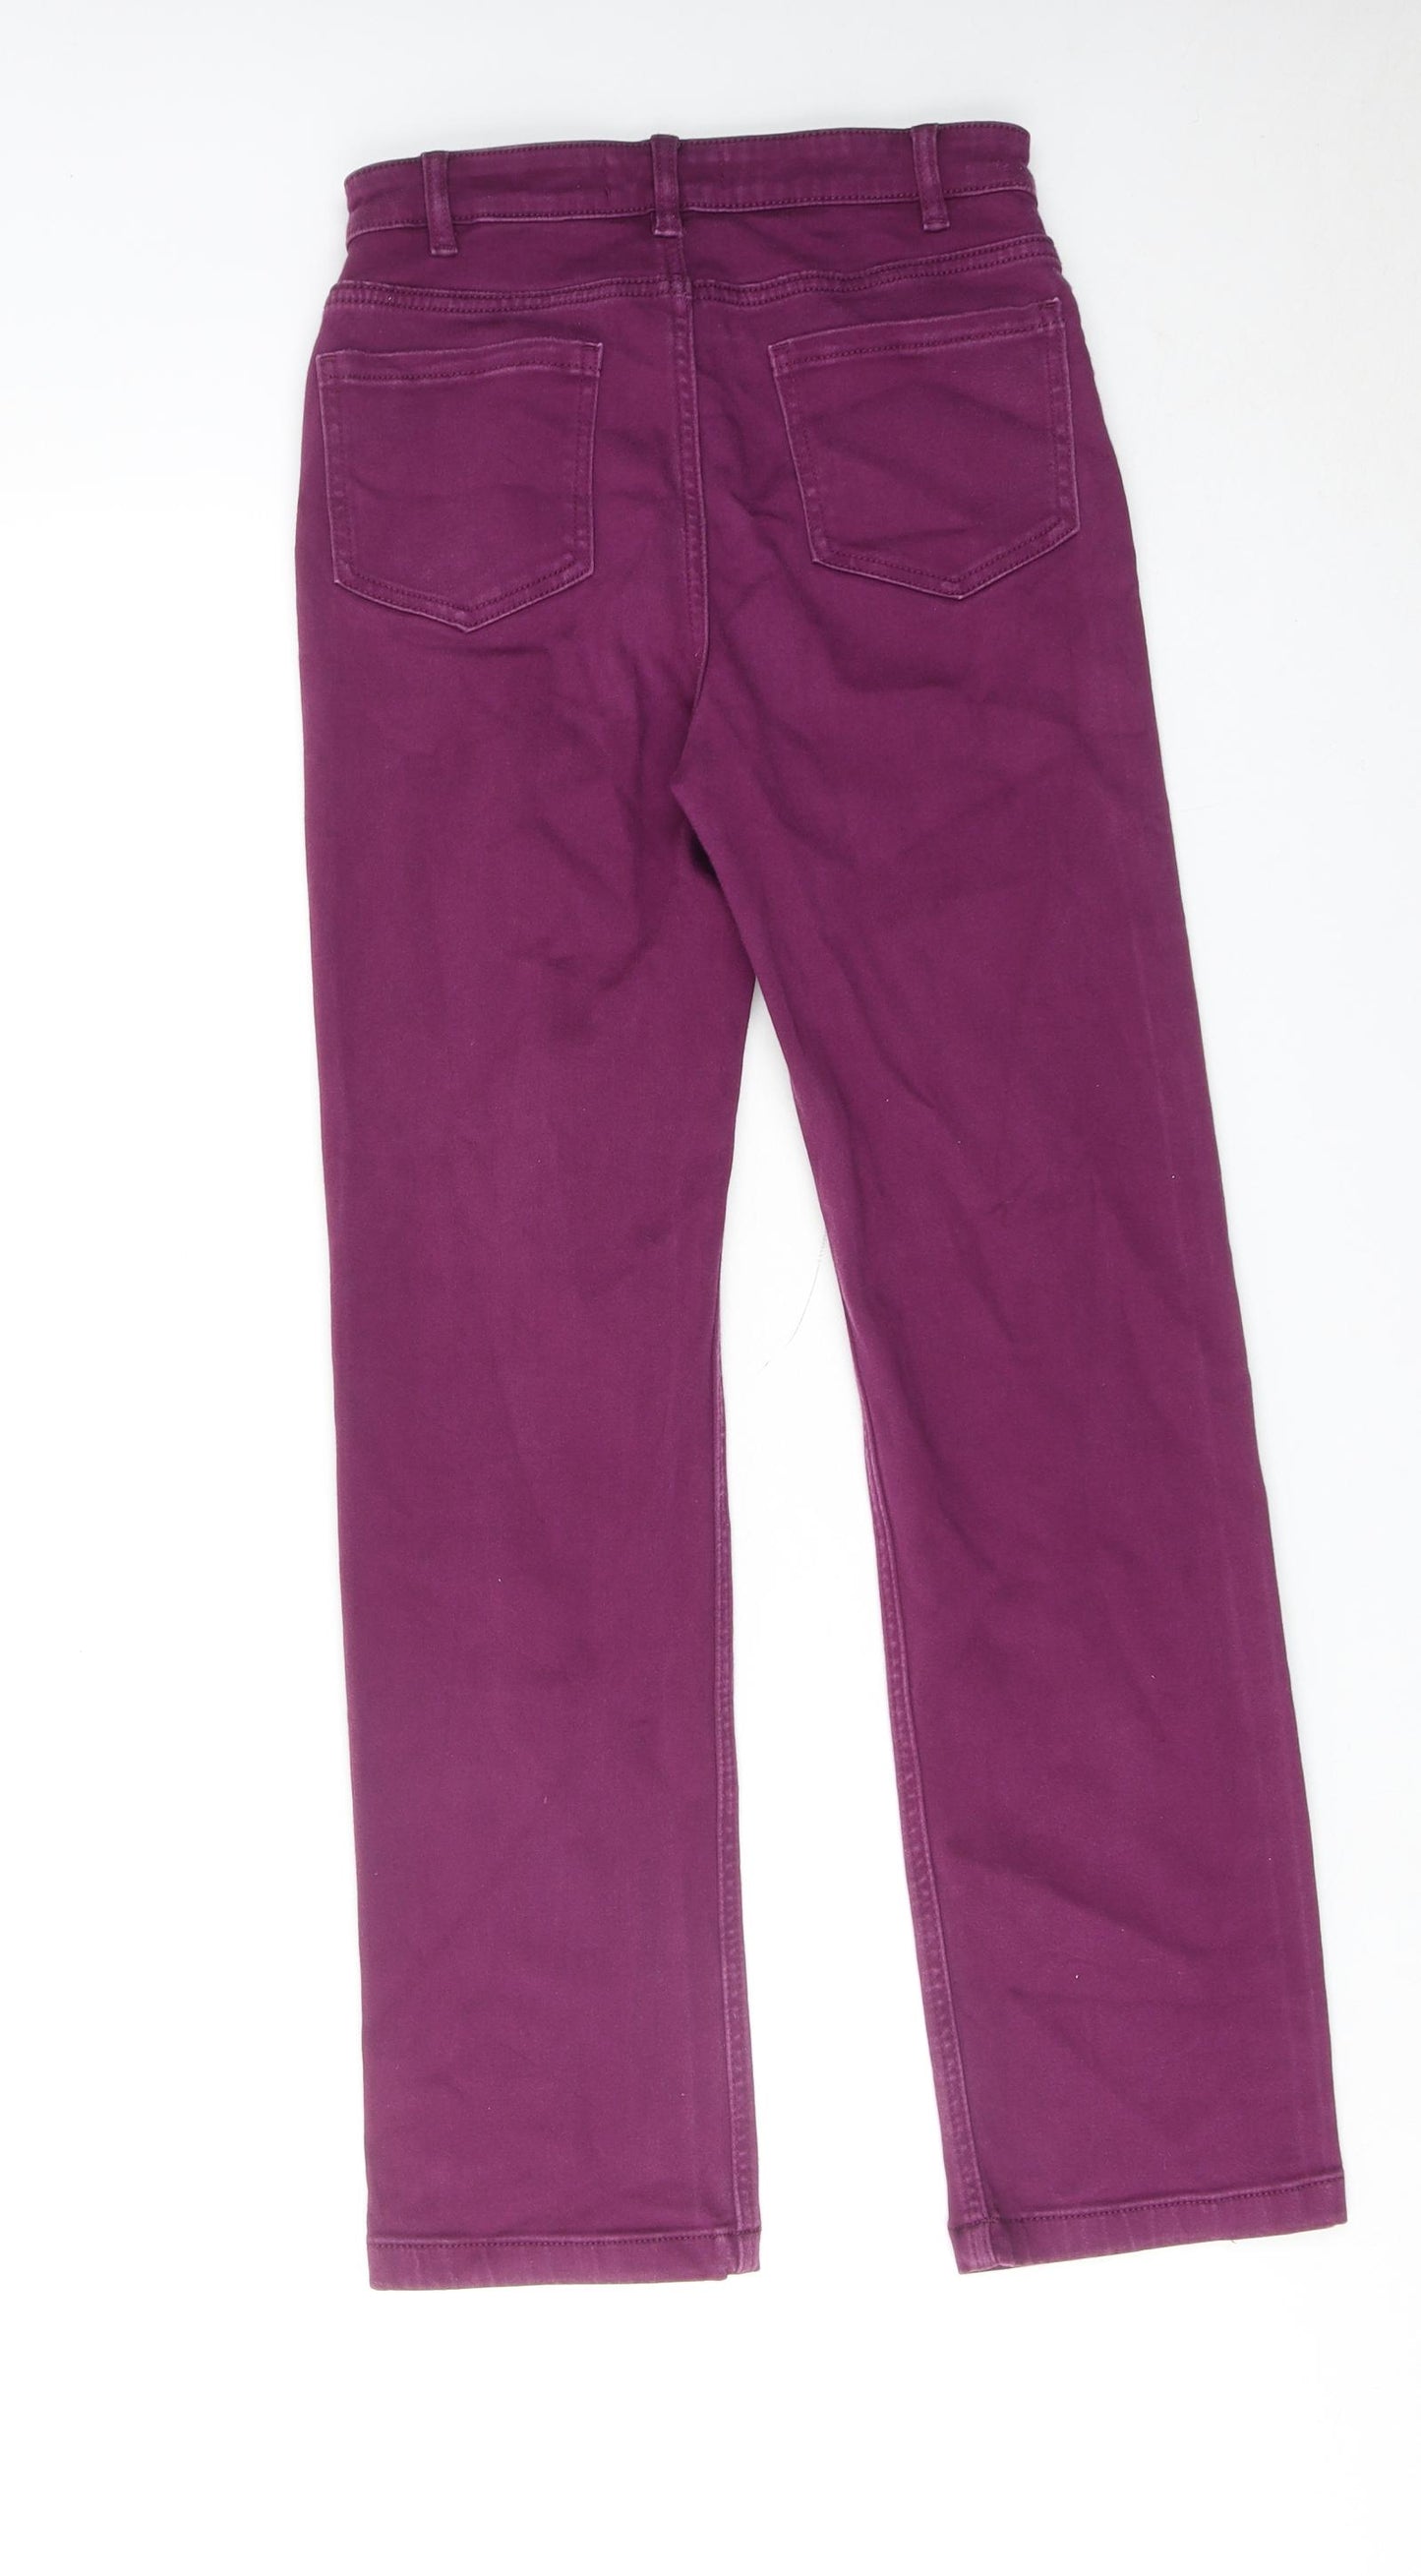 Marks and Spencer Womens Purple Cotton Straight Jeans Size 8 Regular Zip